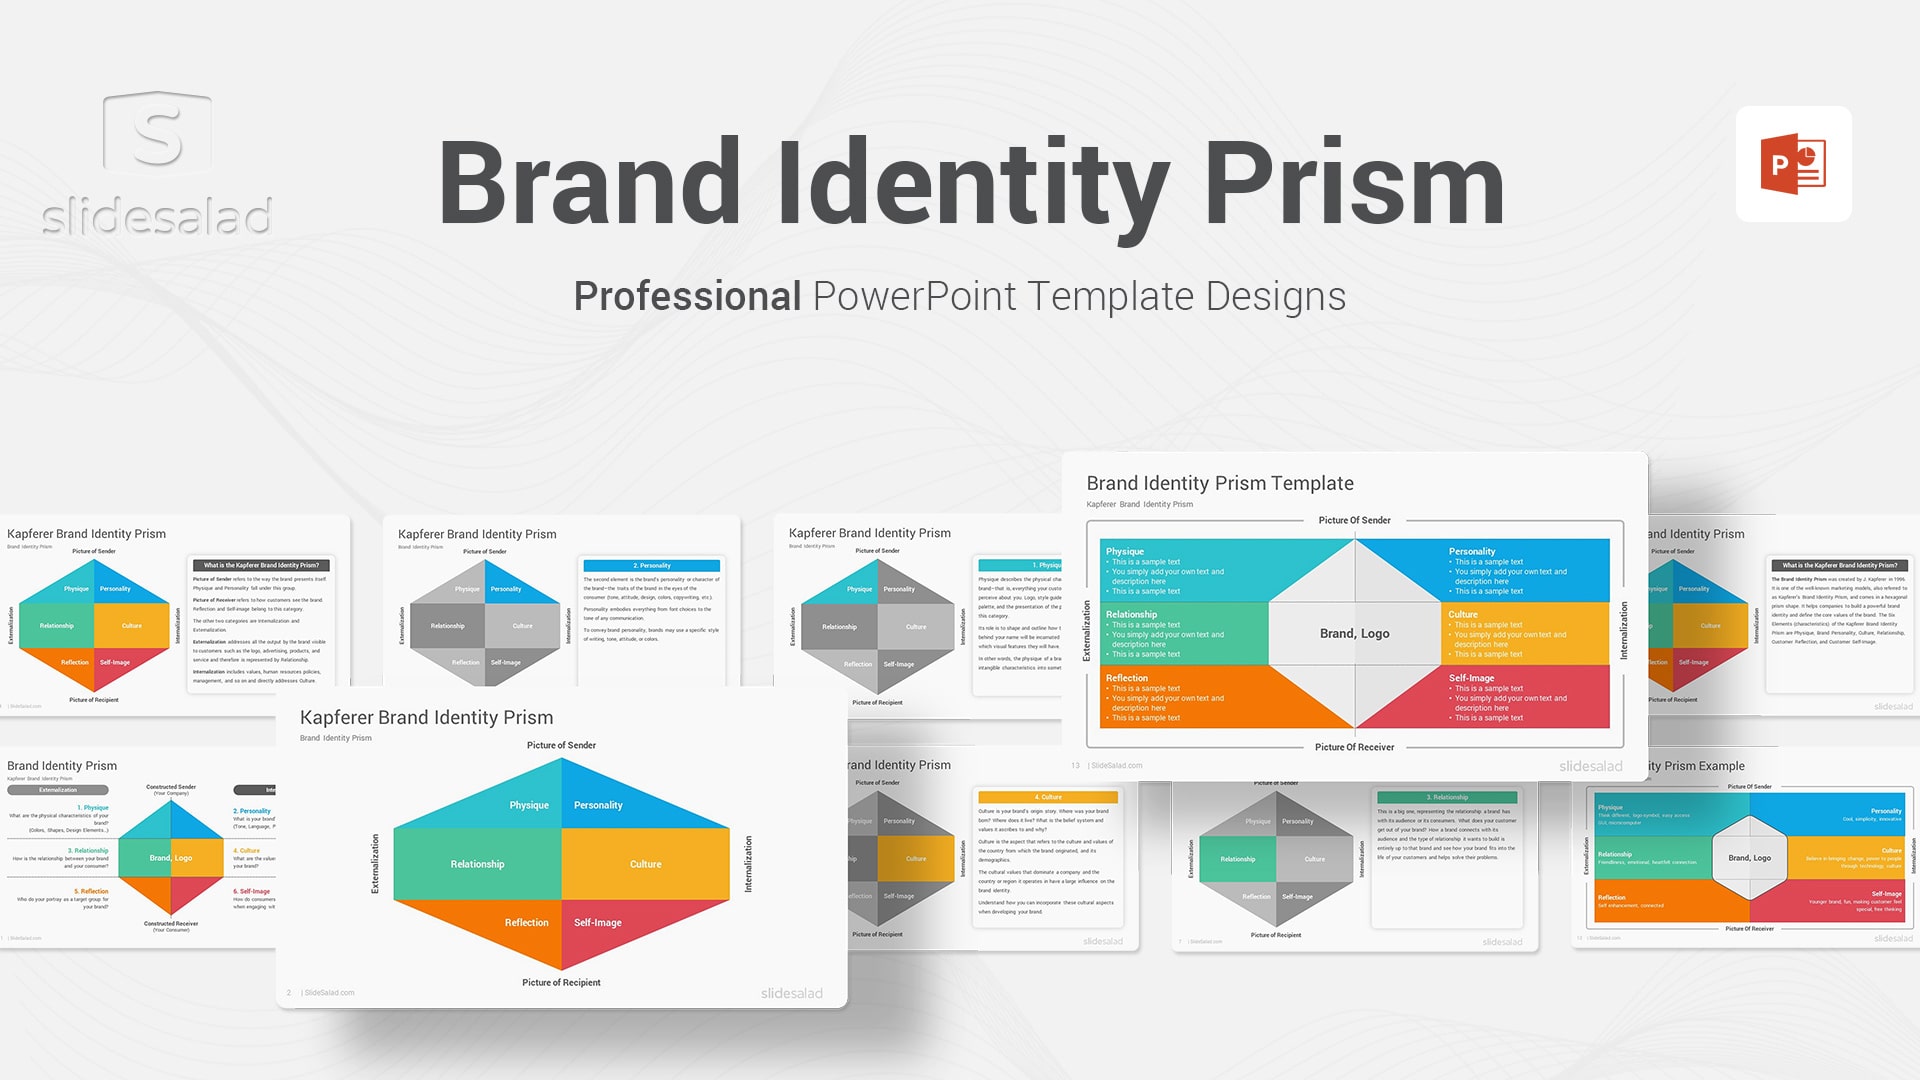 Brand Identity Prism PowerPoint Template Diagrams - Amazing Design Examples and Six Elements of Jean-Noel Kapferer's Brand Identity Prism